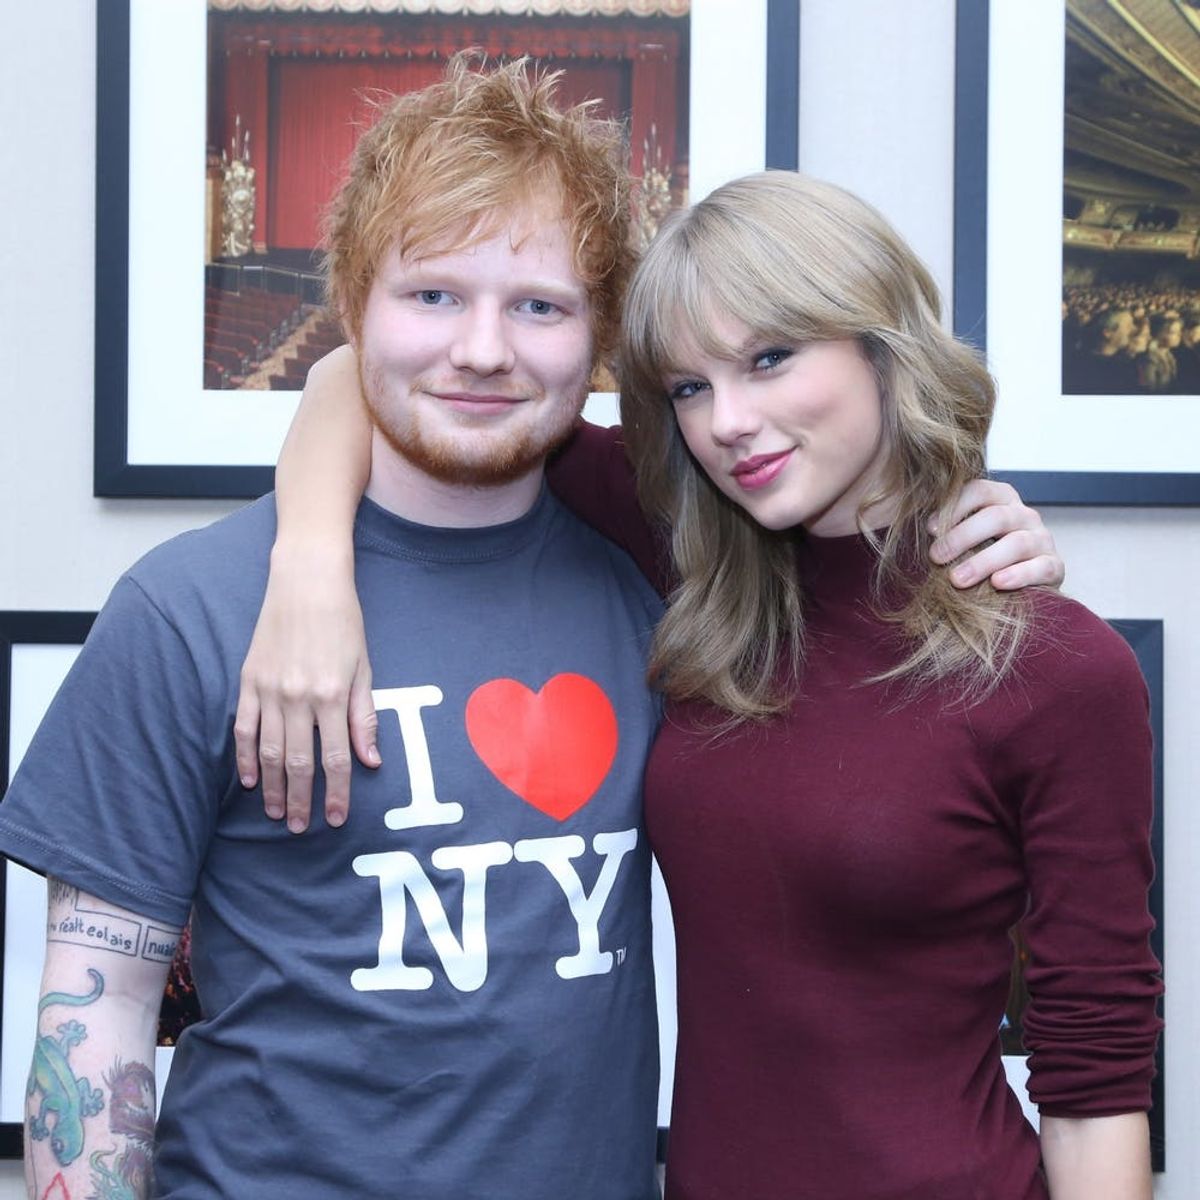 Ed Sheeran Responds to Fan Theory That Taylor Swift’s Song “Dress” Is About Him